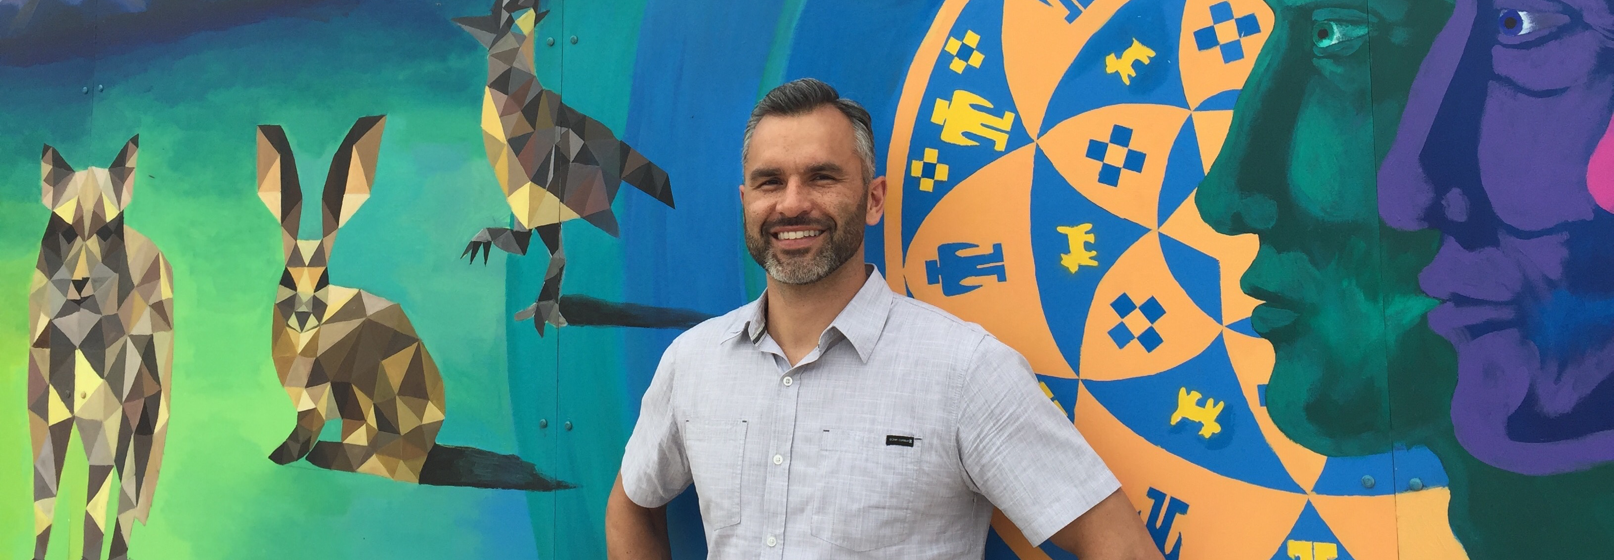 Photograph of Carlos Aguilar in front of a colorful mural